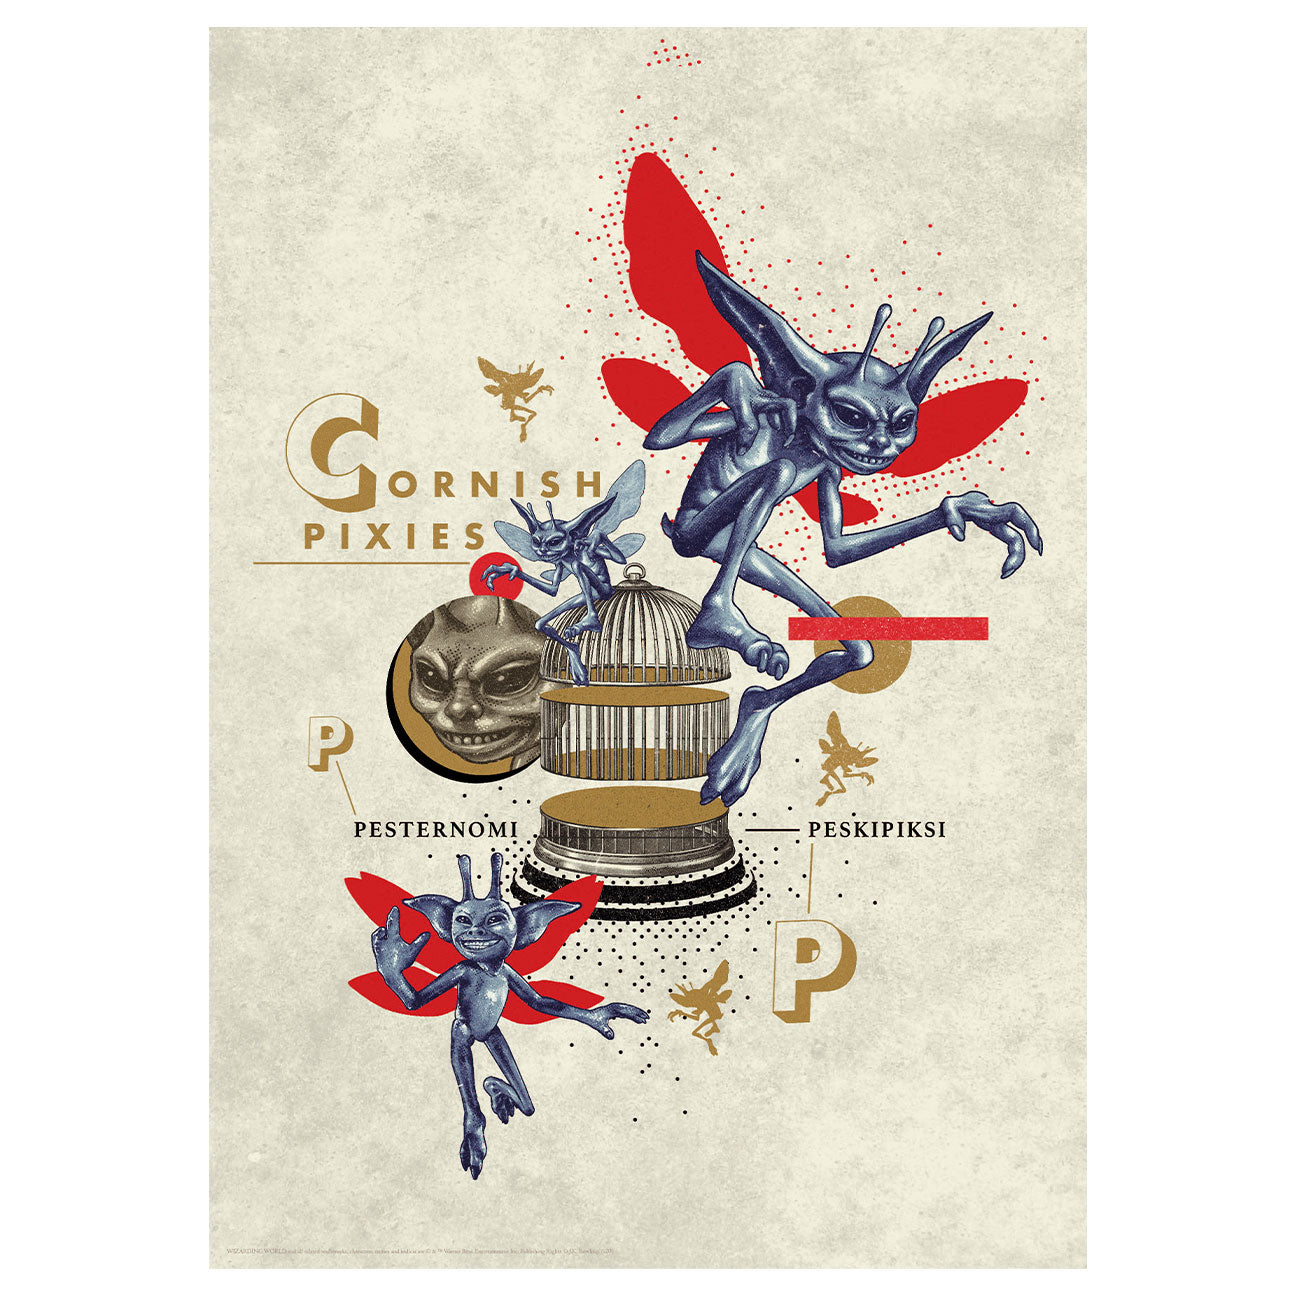 Harry Potter Limited Edition Pixies Art Print